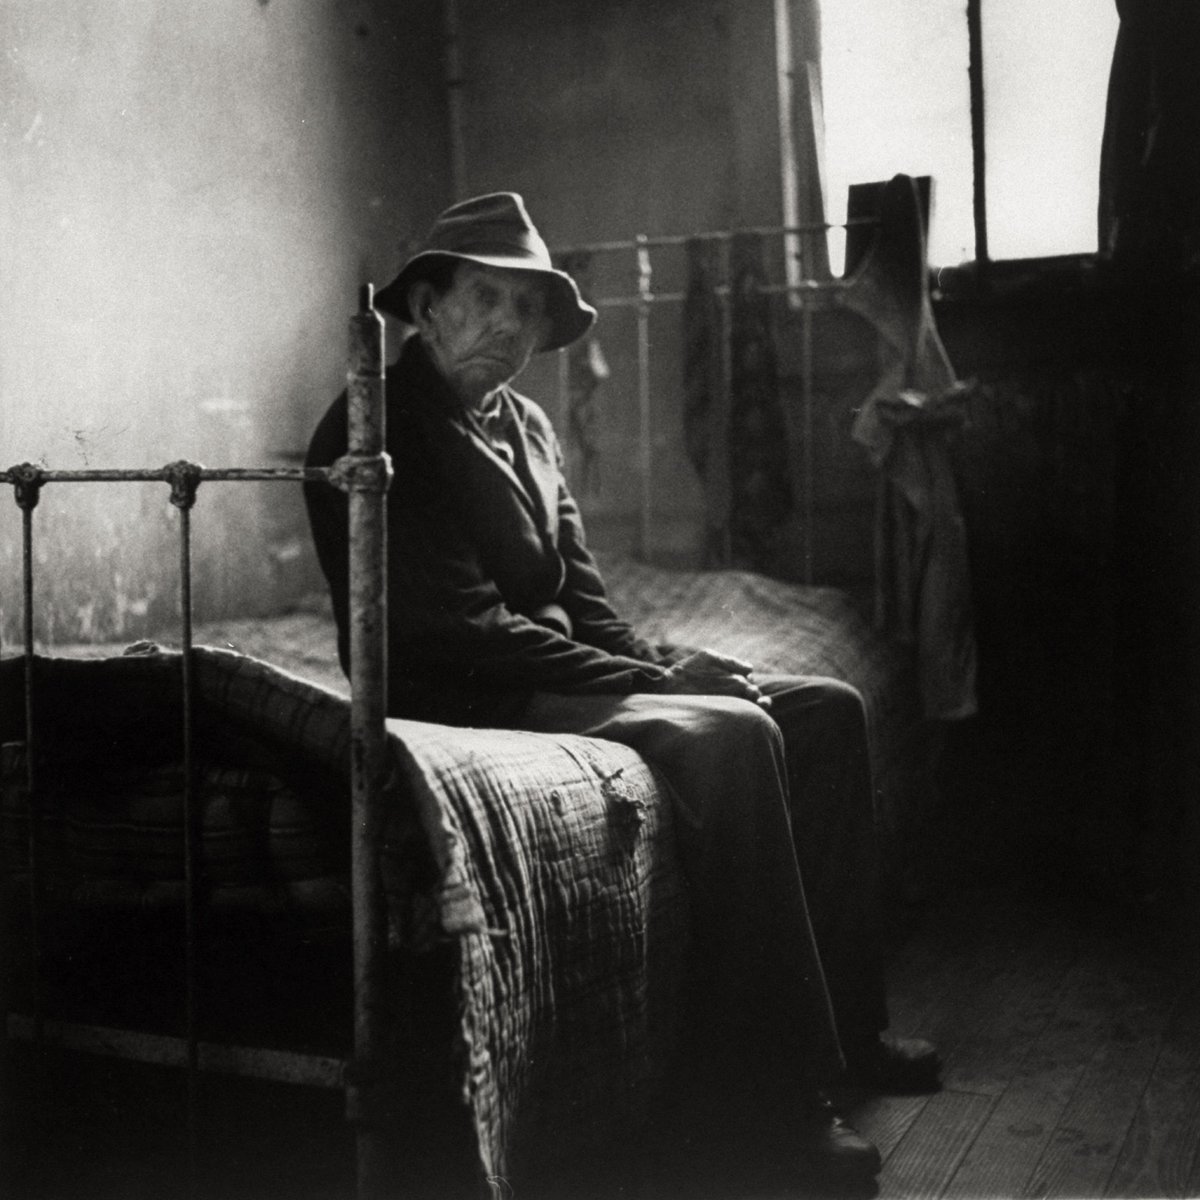 An old man sitting patiently on an old iron bed as he waits for mealtime at a poorhouse, Perry County, Pennsylvania, ca. 1952 - by Wallace Kirkland (1890 - 1983), American